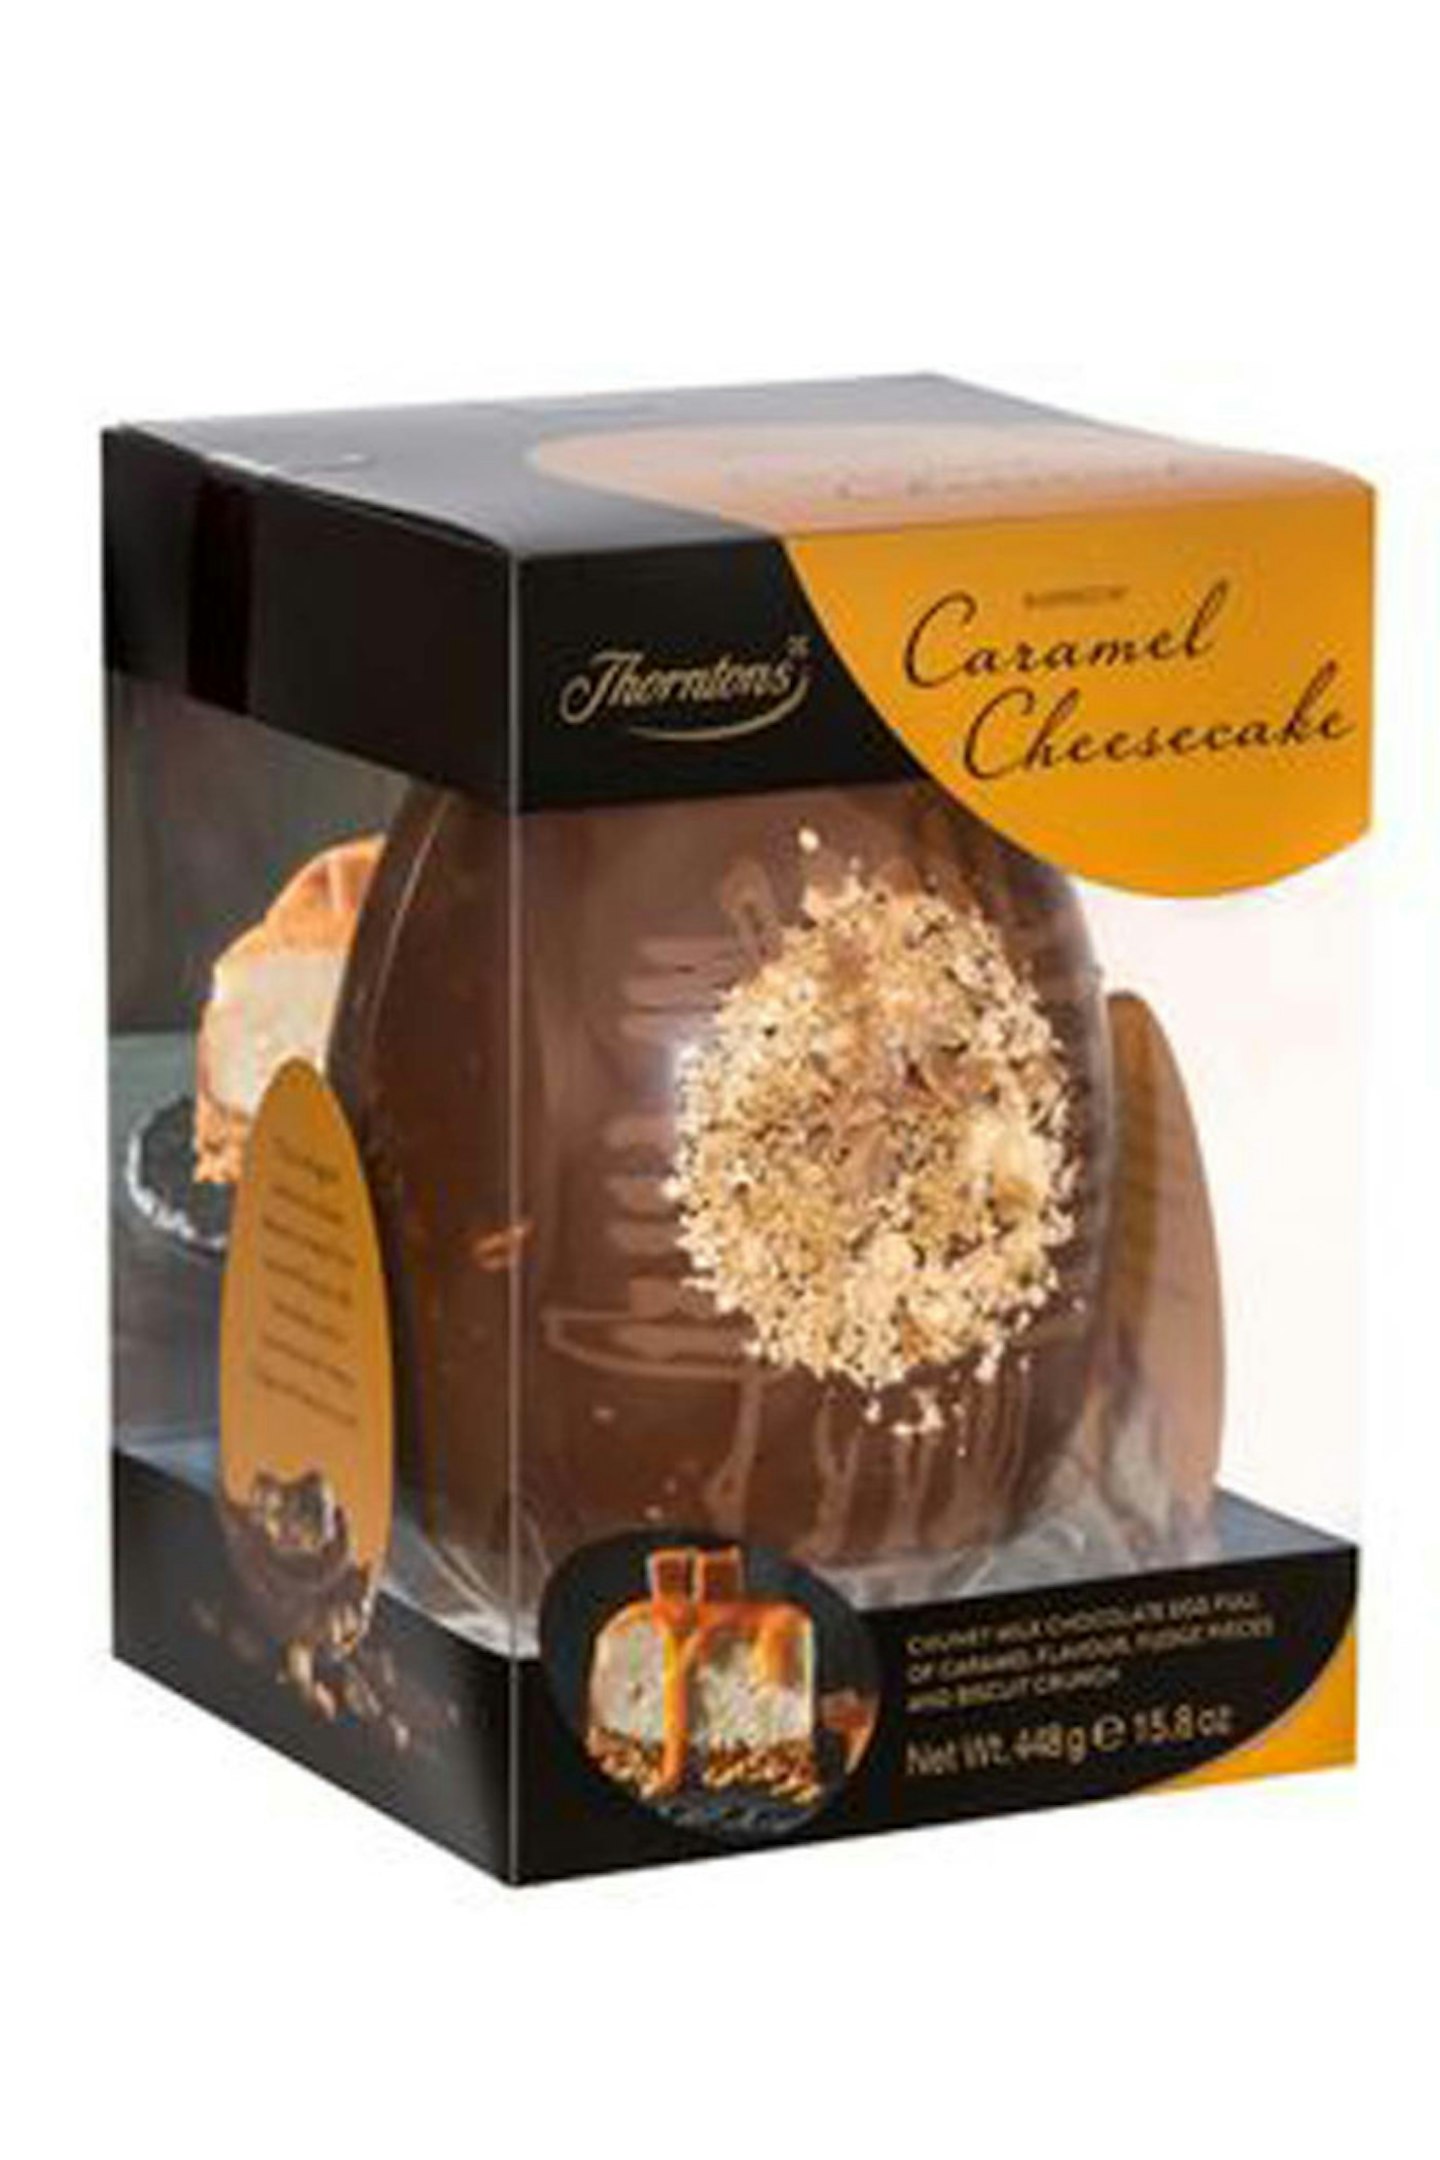 Caramel Cheesecake Easter Egg (448g)  Product Code - 63236 Was-  £15.00 Price-  £10.00  thorntons